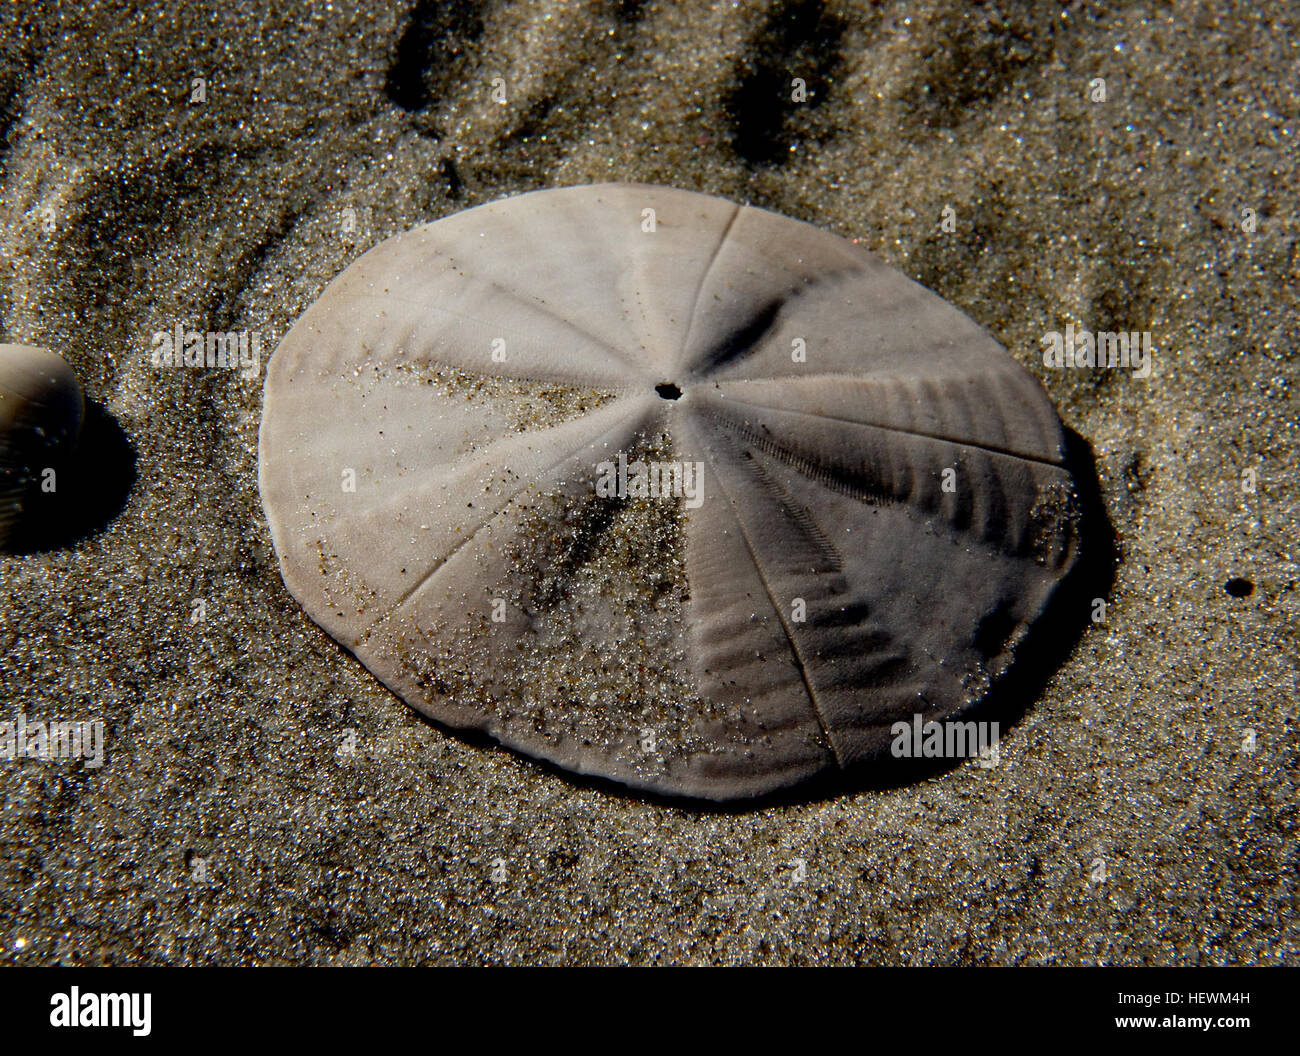 Sand dollars, like all members of the order Clypeasteroida, possess a rigid skeleton known as a test. The test consists of calcium carbonate plates arranged in a fivefold radial pattern. In living individuals the test is covered by a skin of velvet-textured spines; these spines are in turn covered with very small hairs (cilia). Coordinated movements of the spines enable sand dollars to move across the seabed. Stock Photo